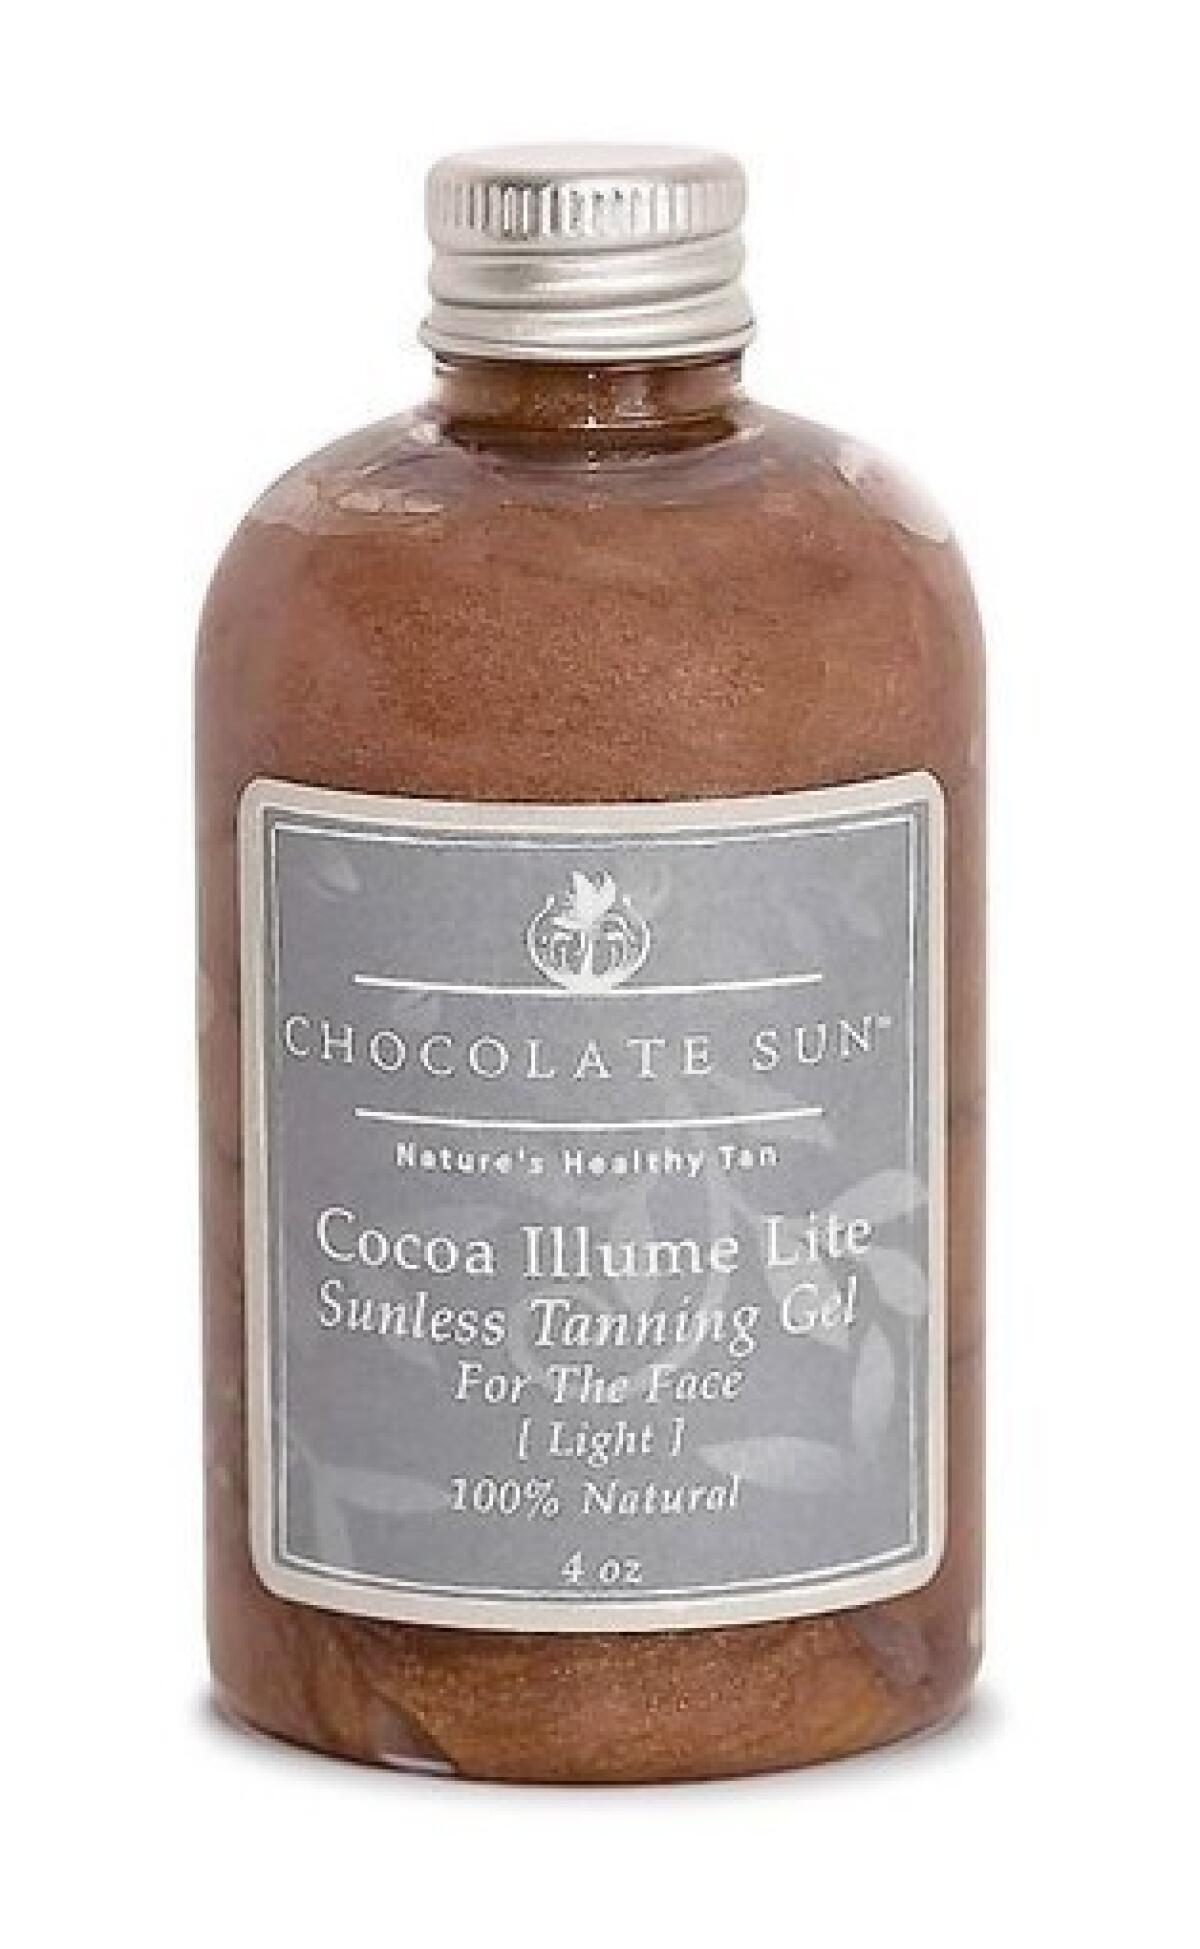 Cocoa Glow by Chocolate Sun is an all-natural, organic self-tanning application.